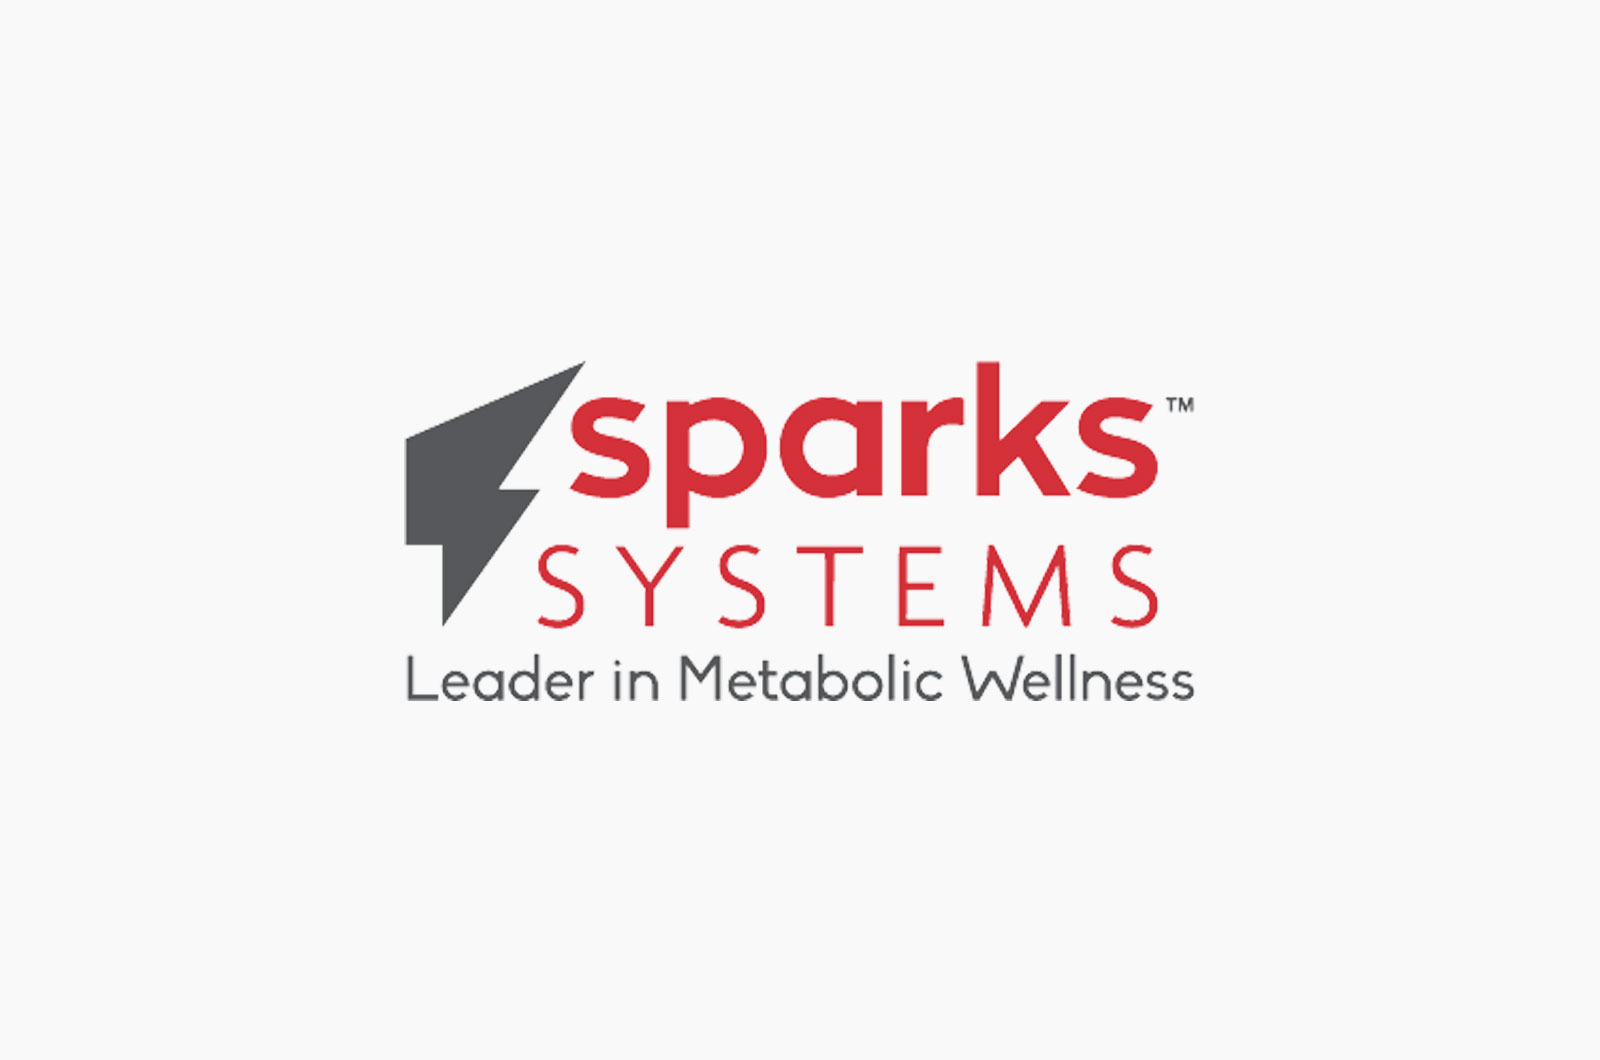 Why I Endorse Sparks Systems!